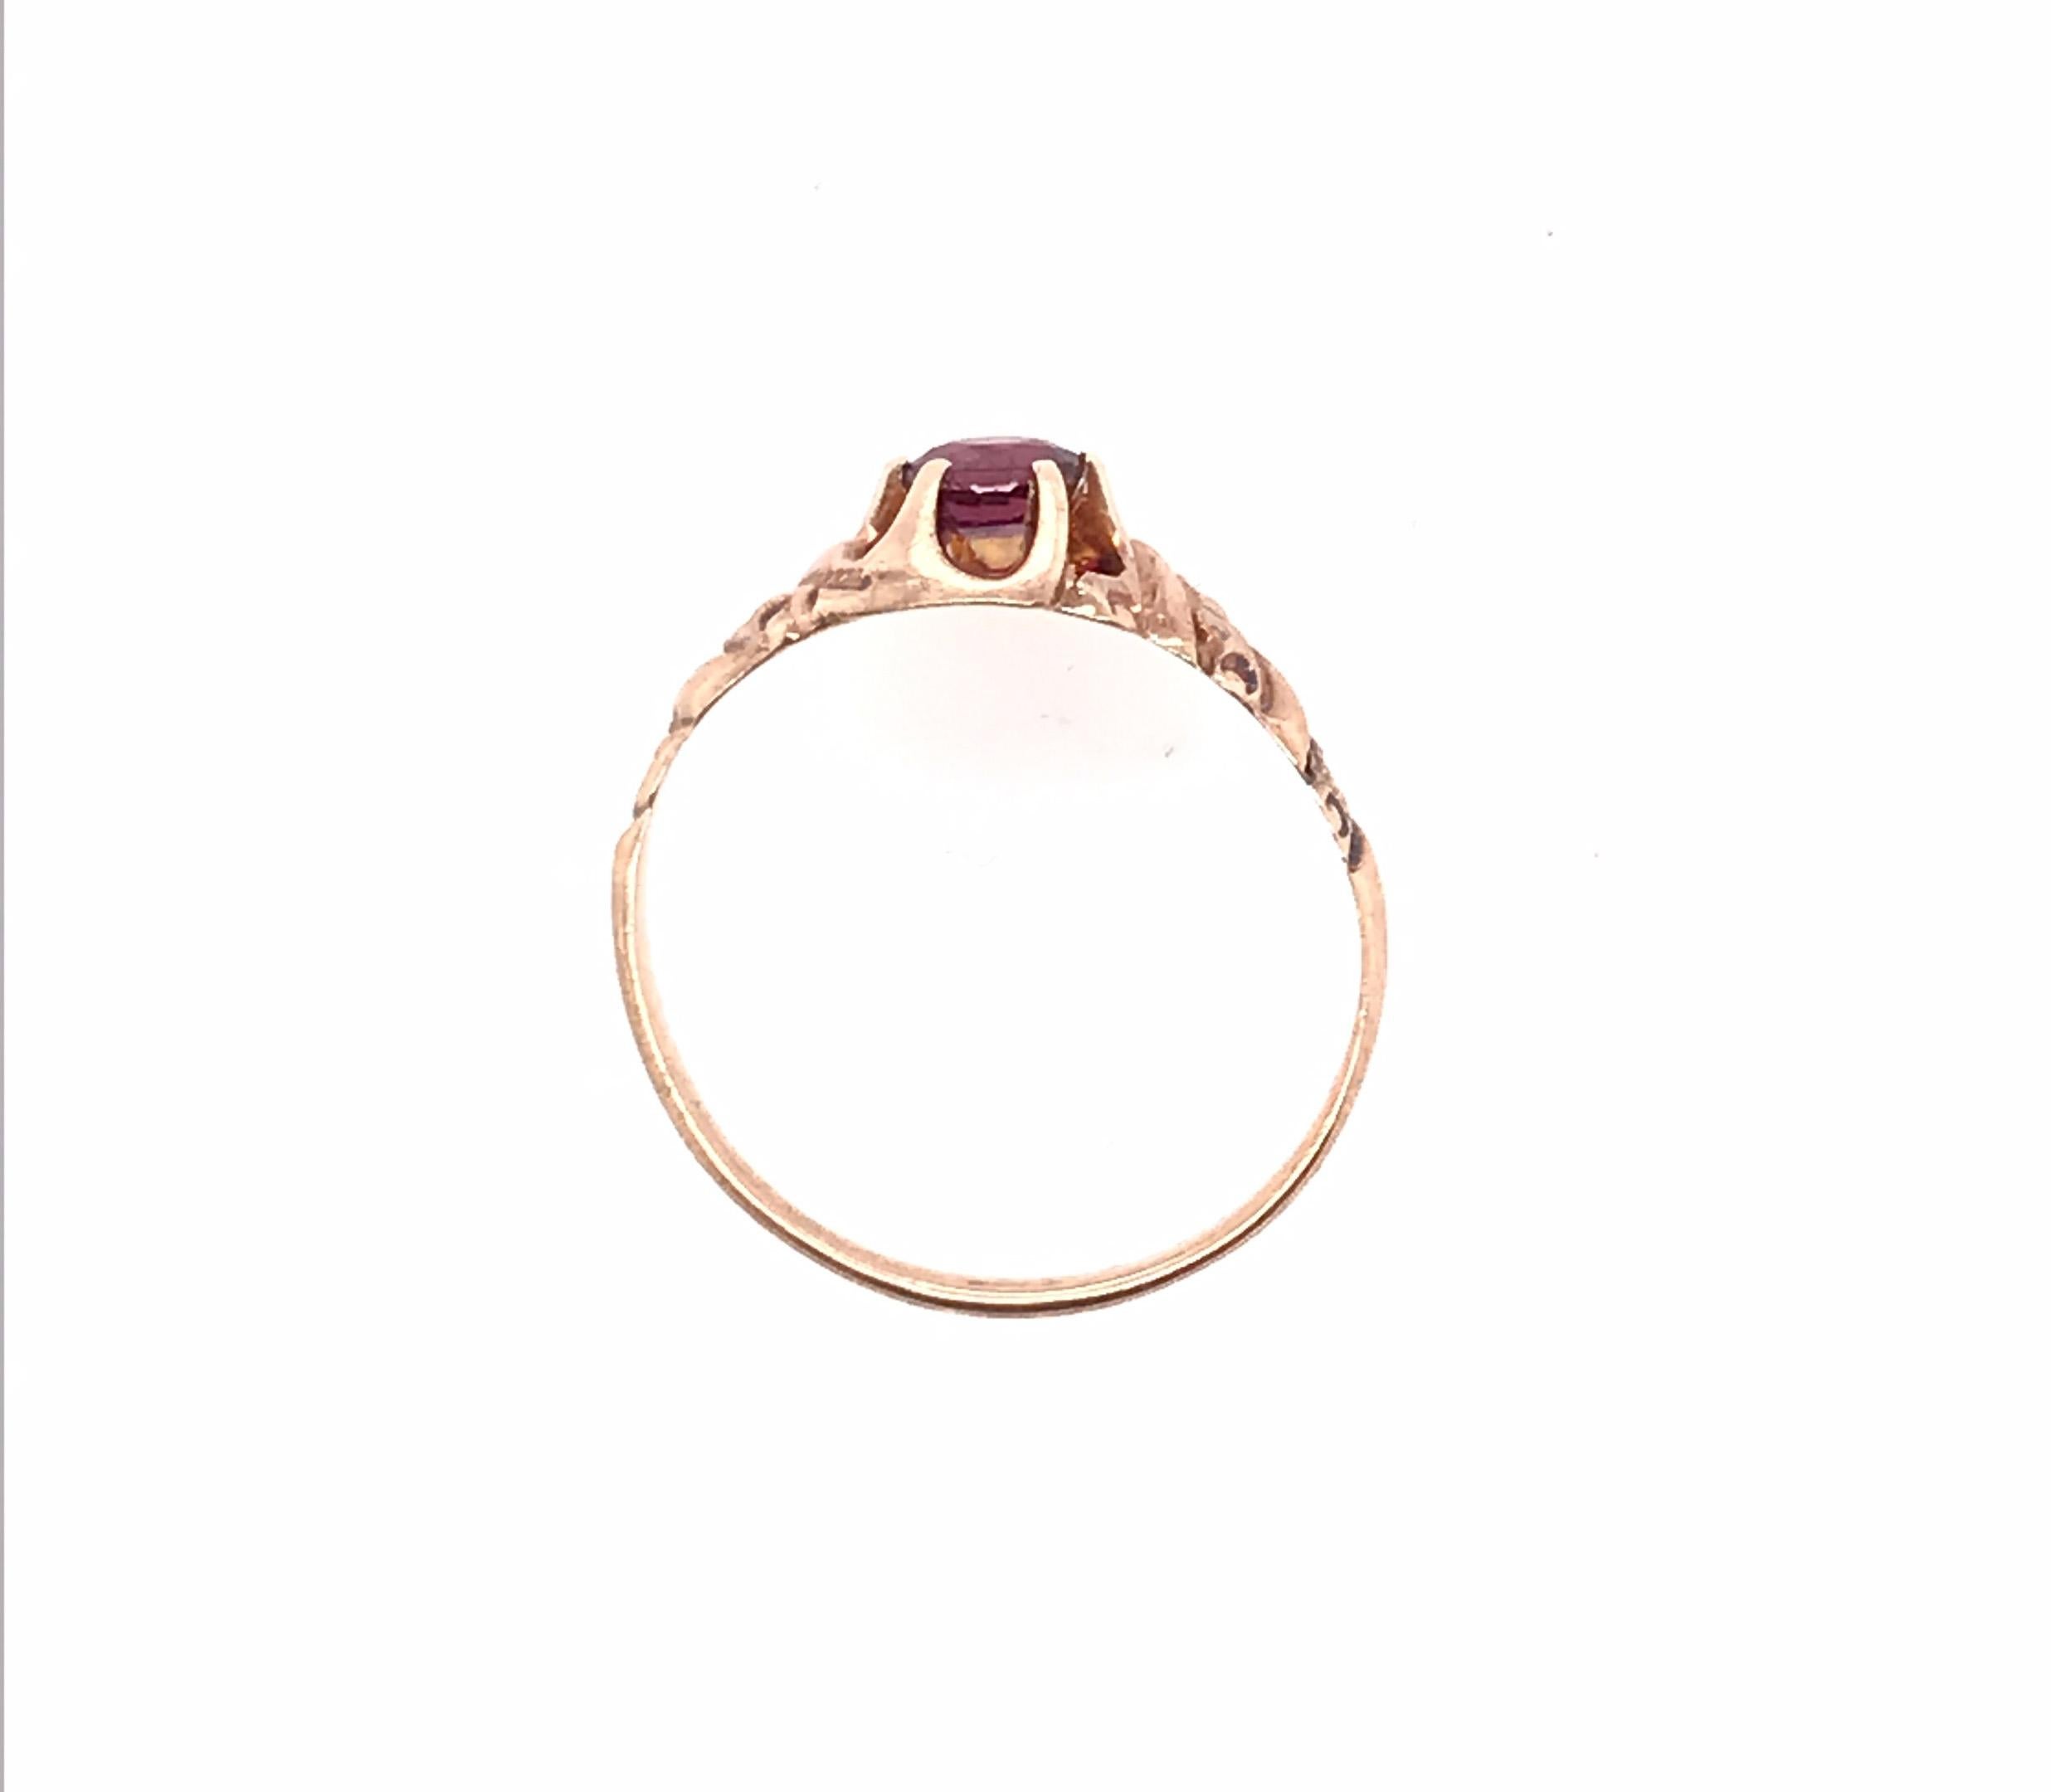 Genuine Original Victorian Antique from 1860's-1880's Ruby Solitaire Ring .55ct Round  Cut Sz 8 Yellow Gold


Features a Genuine Natural .55ct Round Ruby Gemstone Center

Ruby Entices Rich Bold Color 

Deep Hand Carved Engraving

100% Natural Ruby